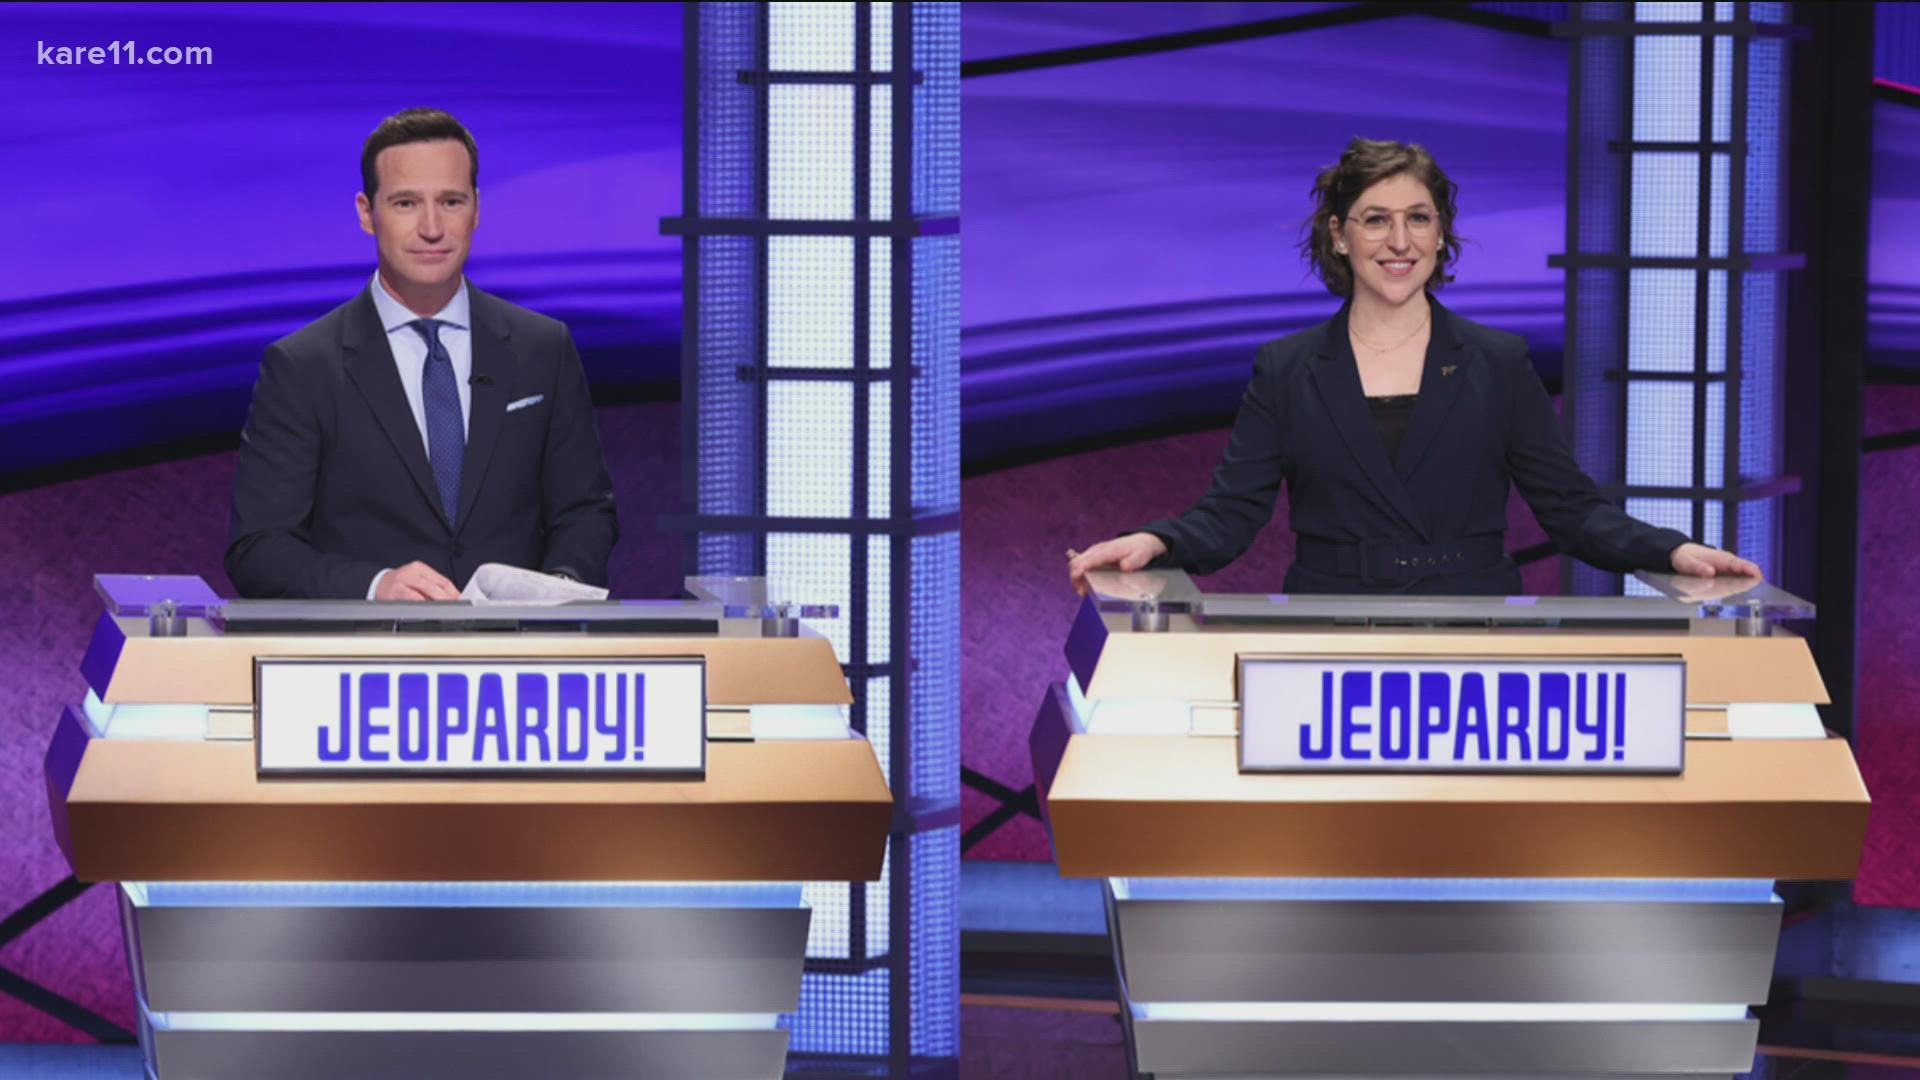 Jeopardy! fans are known for their passion, and now they're reacting to the announcement naming 2 new hosts of the long-running game show.